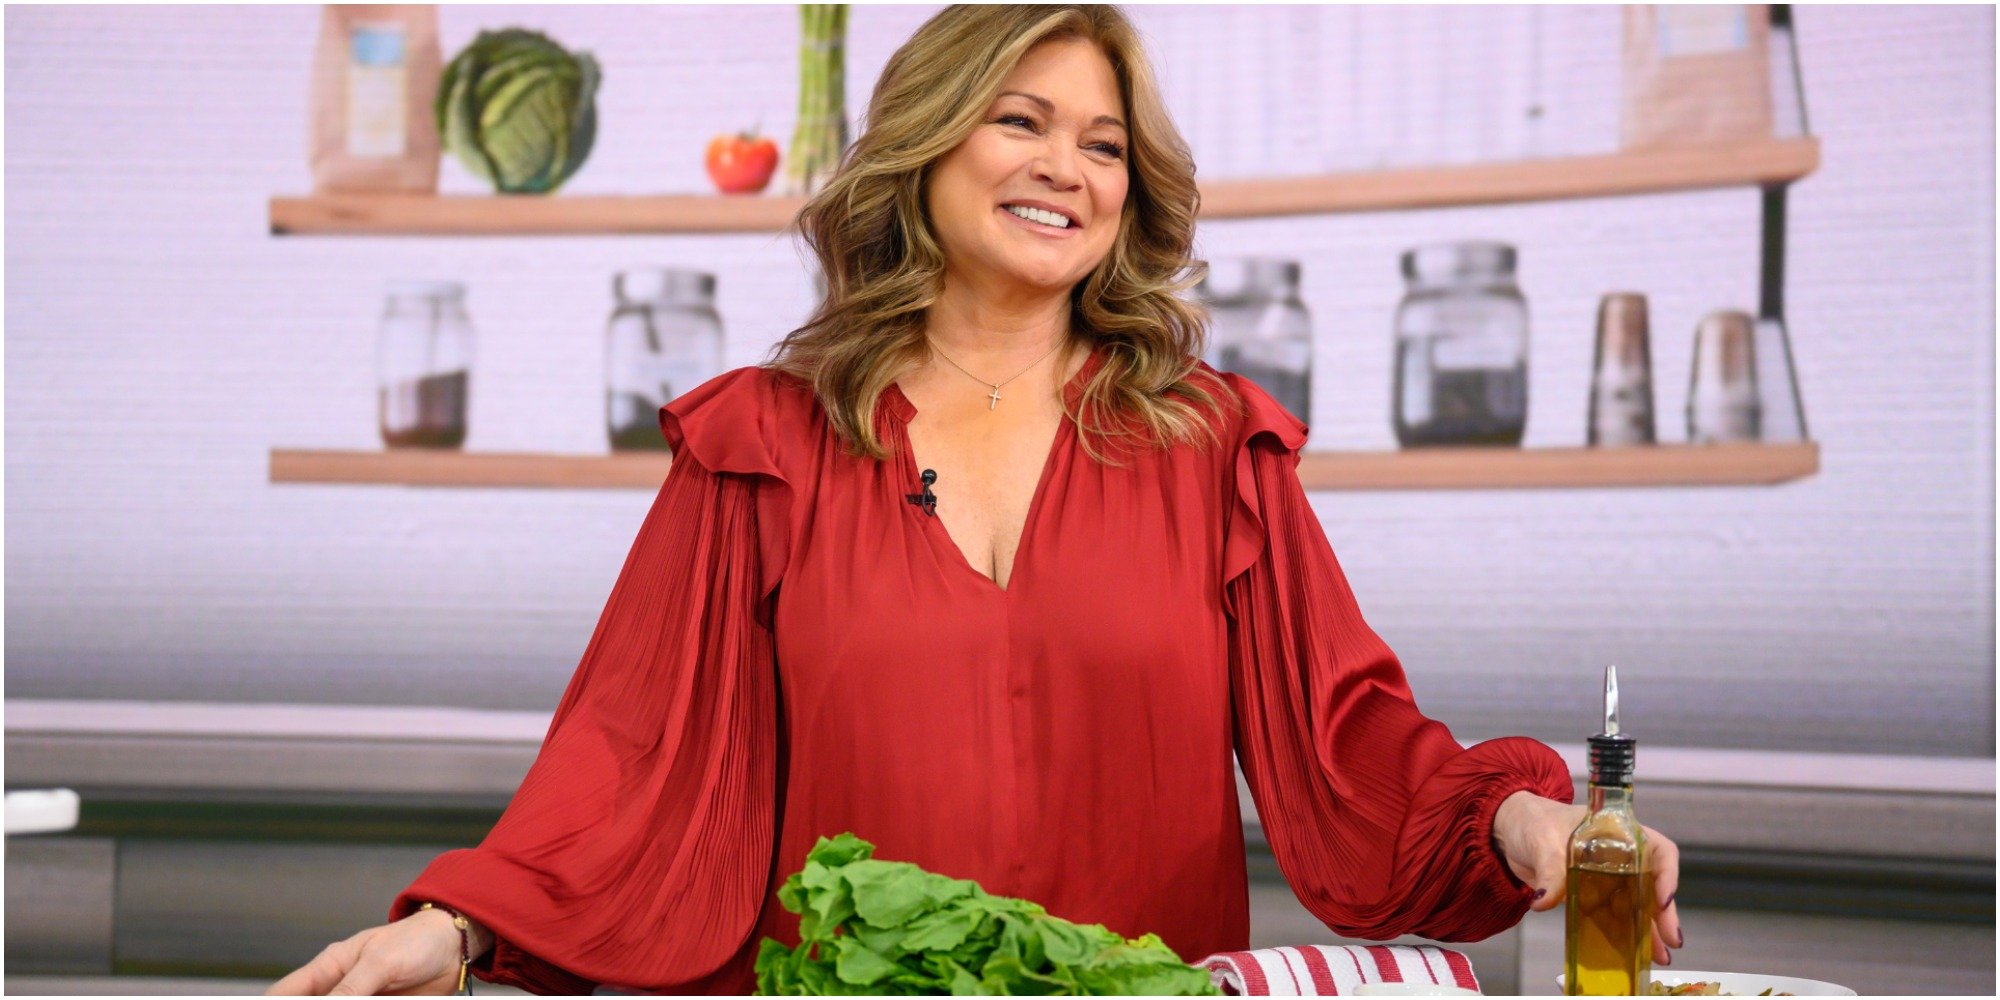 Valerie Bertinelli poses on the set of the Today Show.